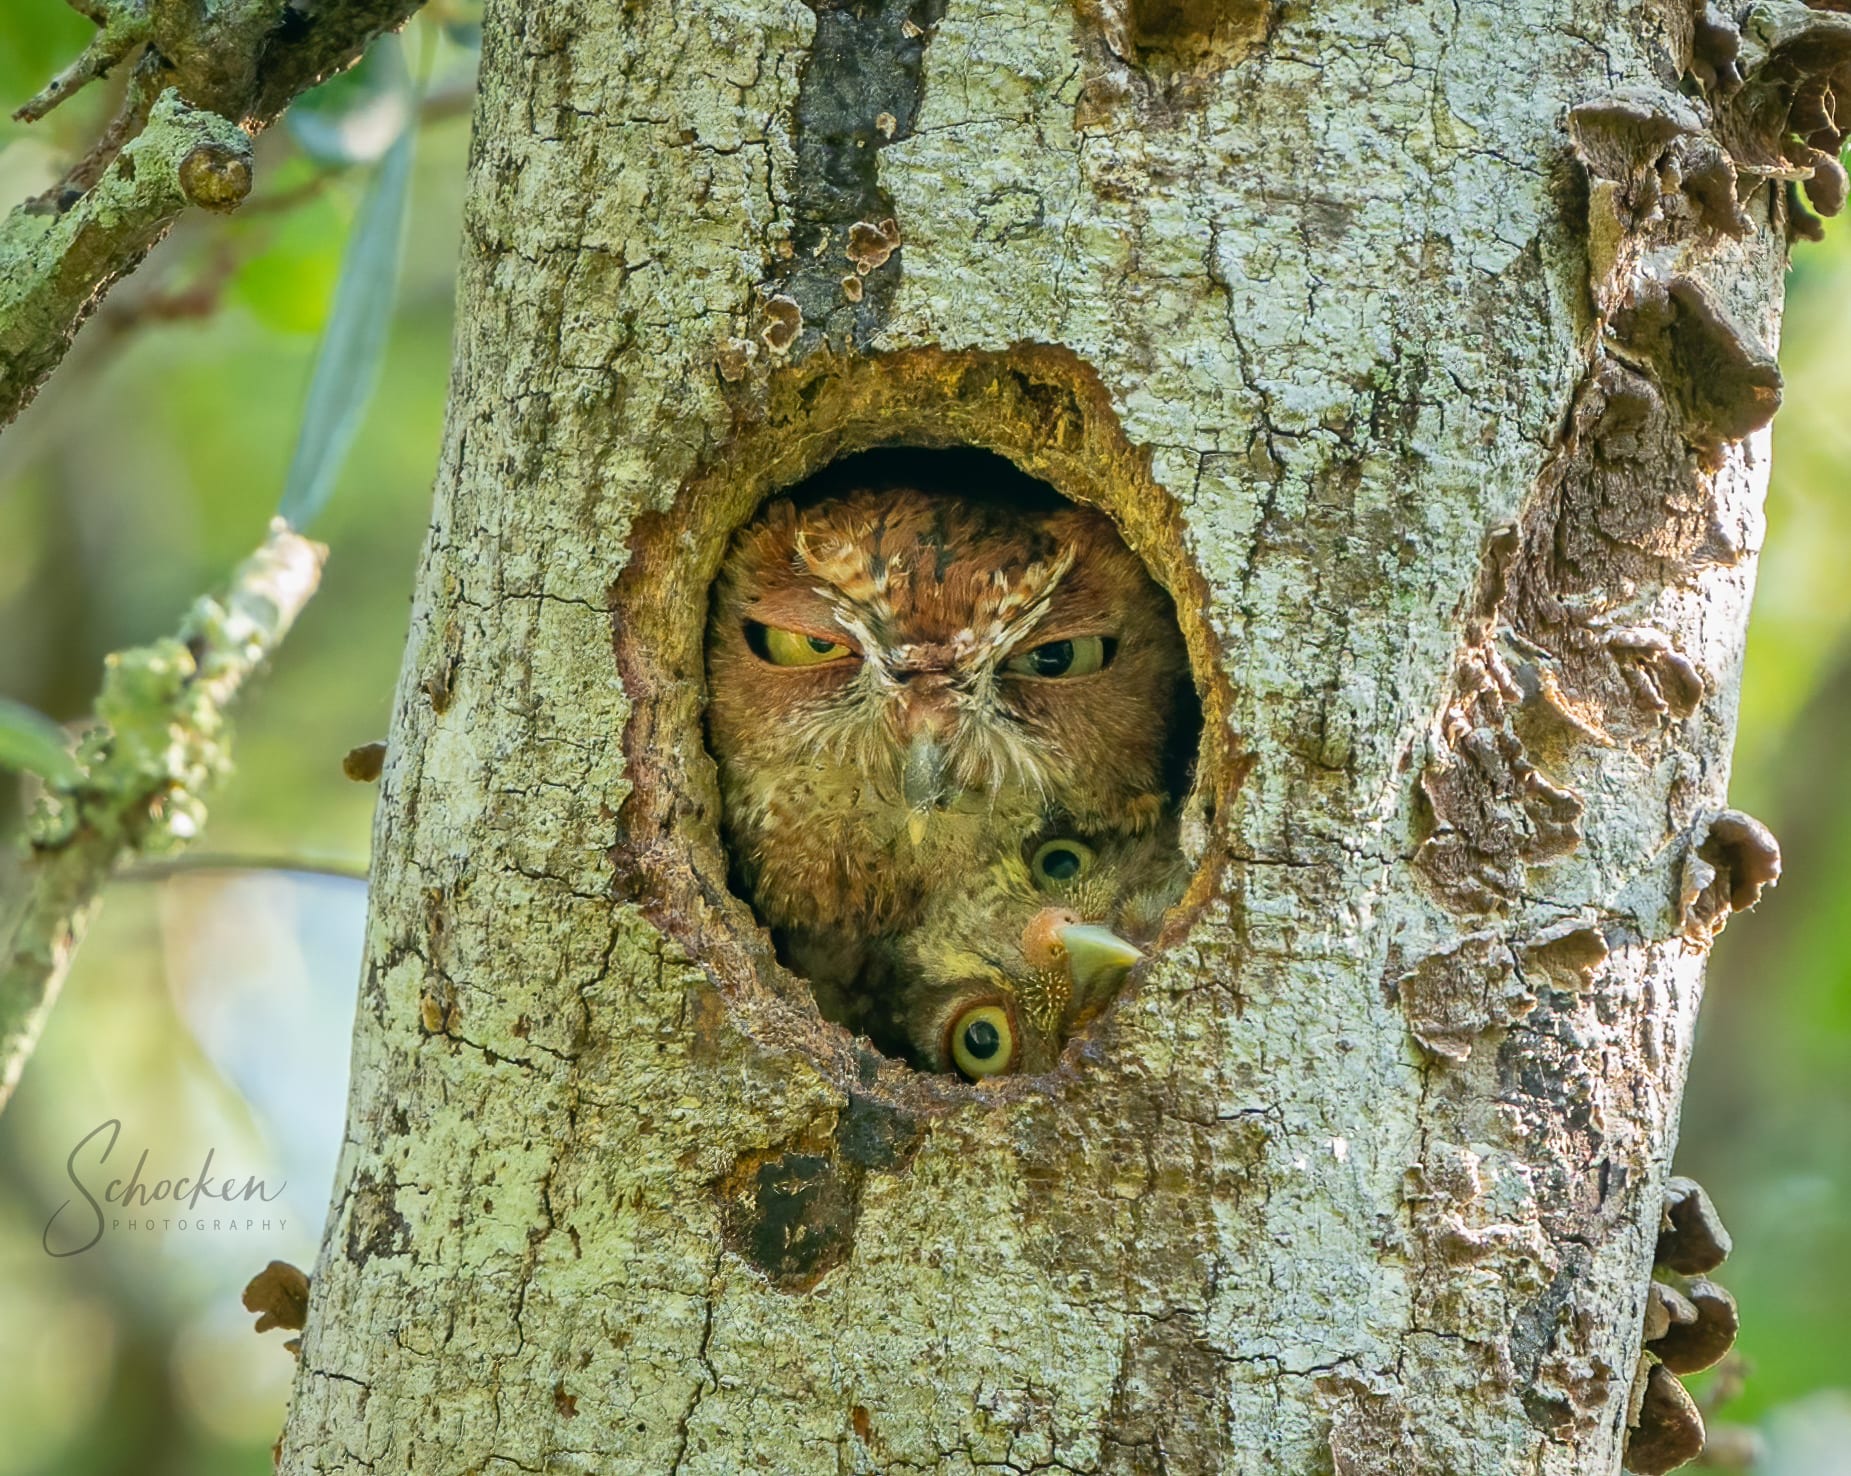 In a tree trunk… A photographer documents the “angry” expression of a female owl